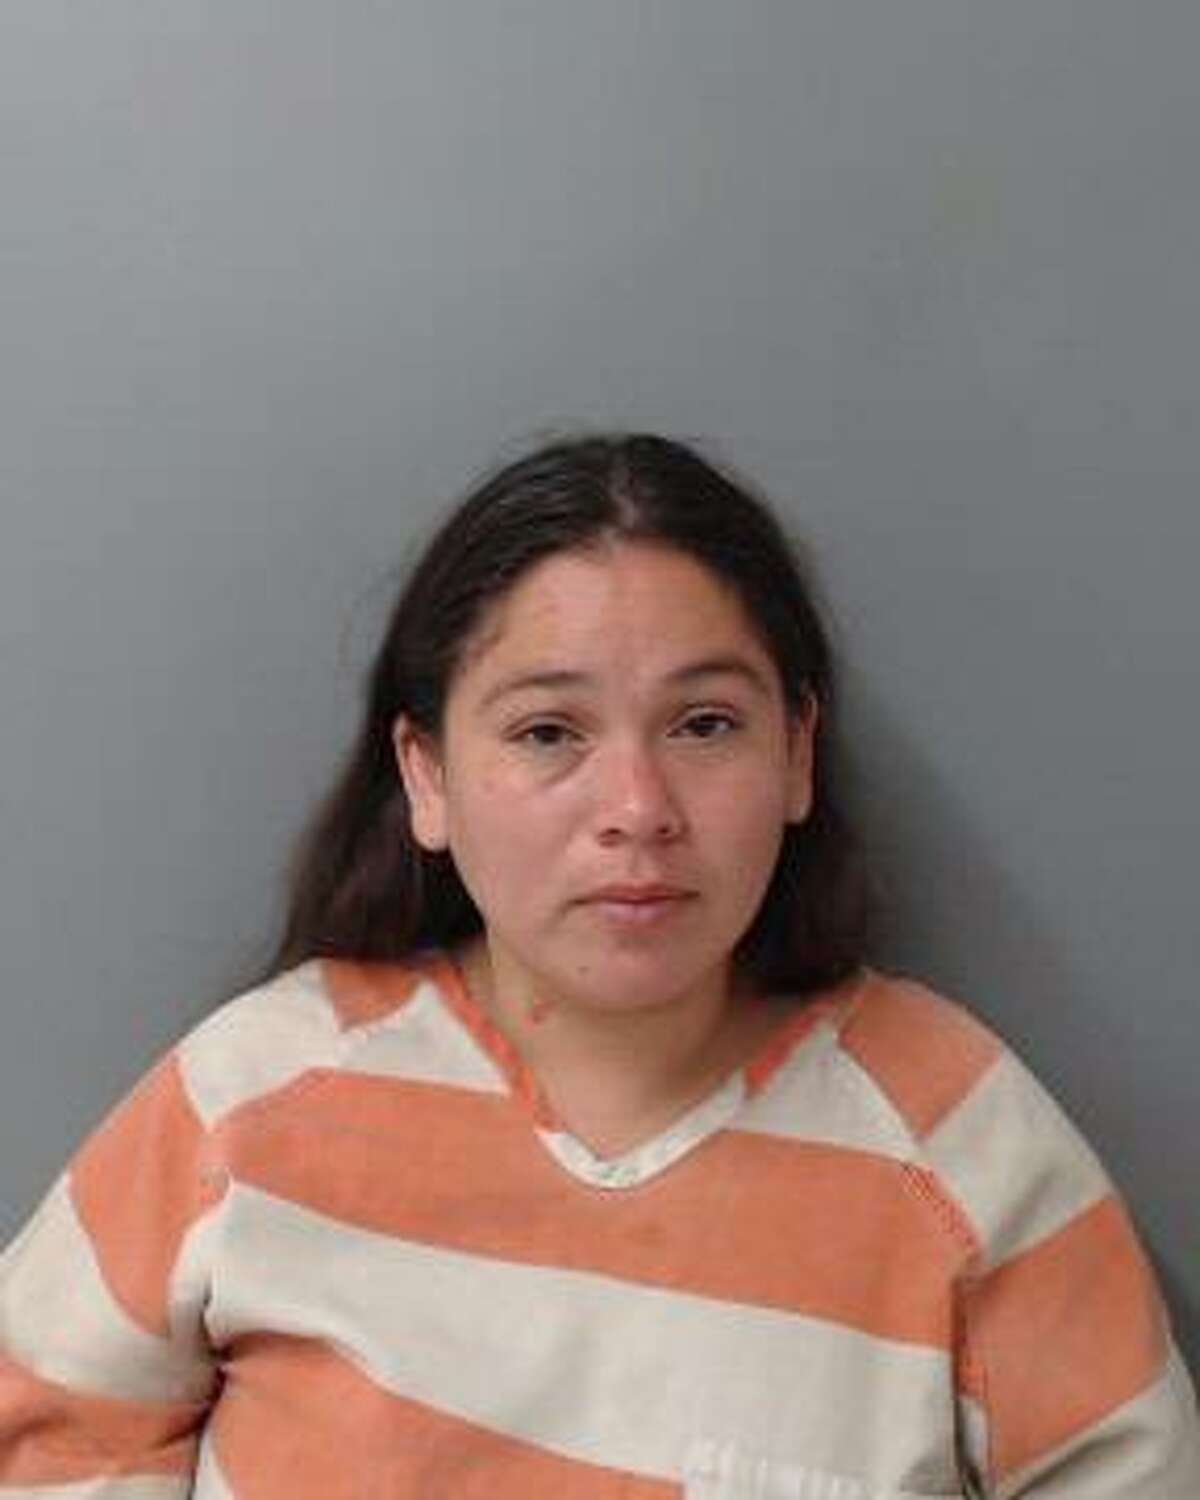 Jessica Lizette Villarreal, 35, was charged on Tuesday with endangerment of a child, a state jail felony punishable with up to two years in jail and a possible fine of $10,000.